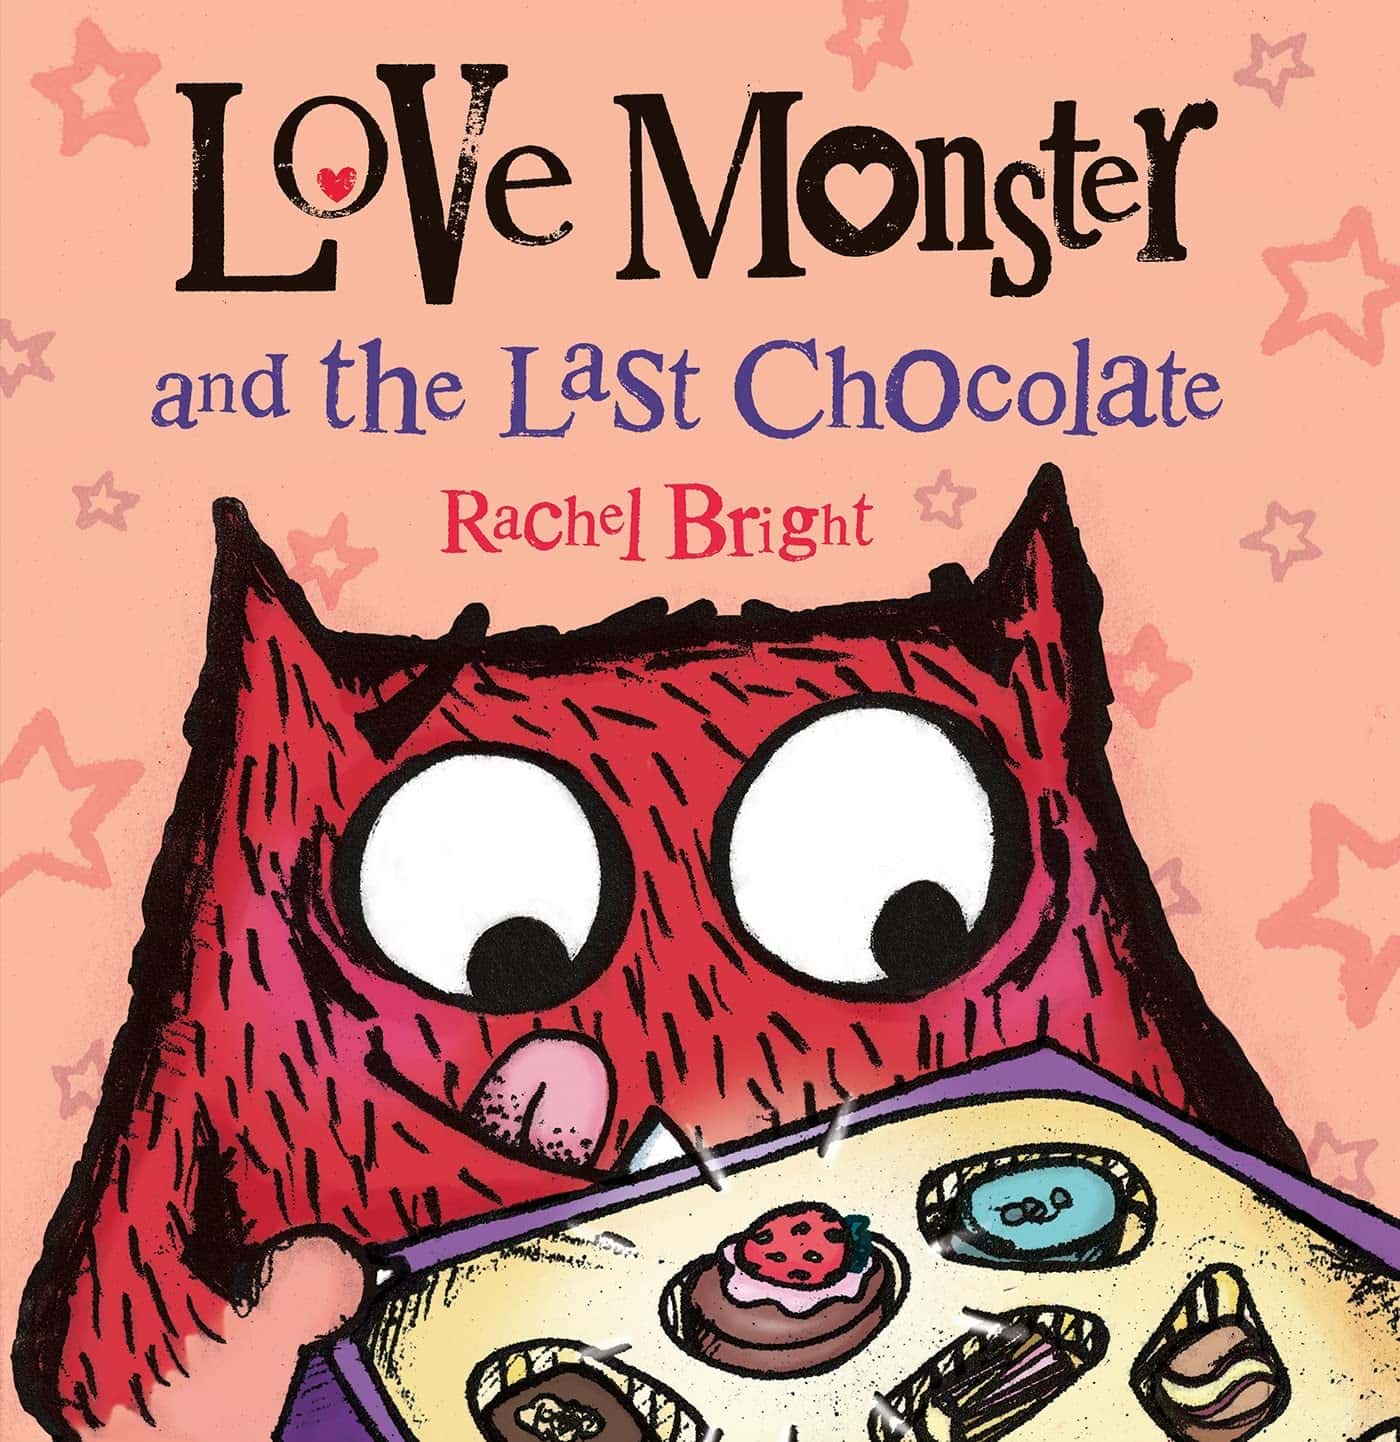 “Love Monster and the Last Chocolate” by Rachel Bright